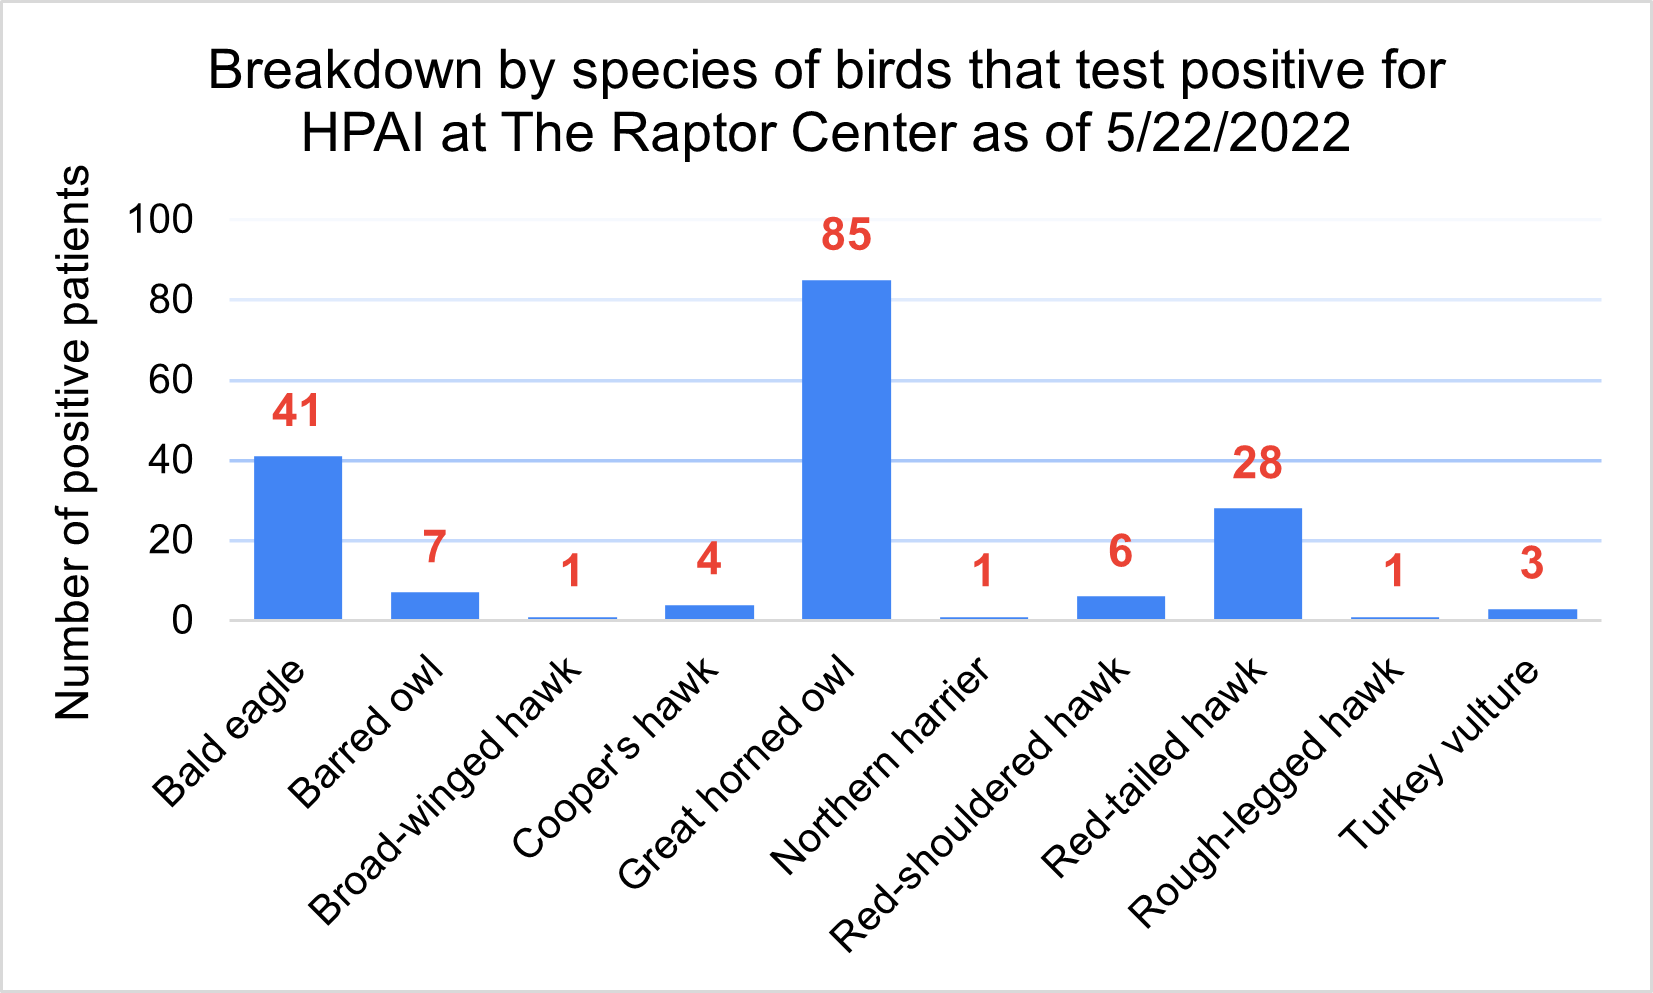 Chart showing the number of birds that tested positive for HPAI by species